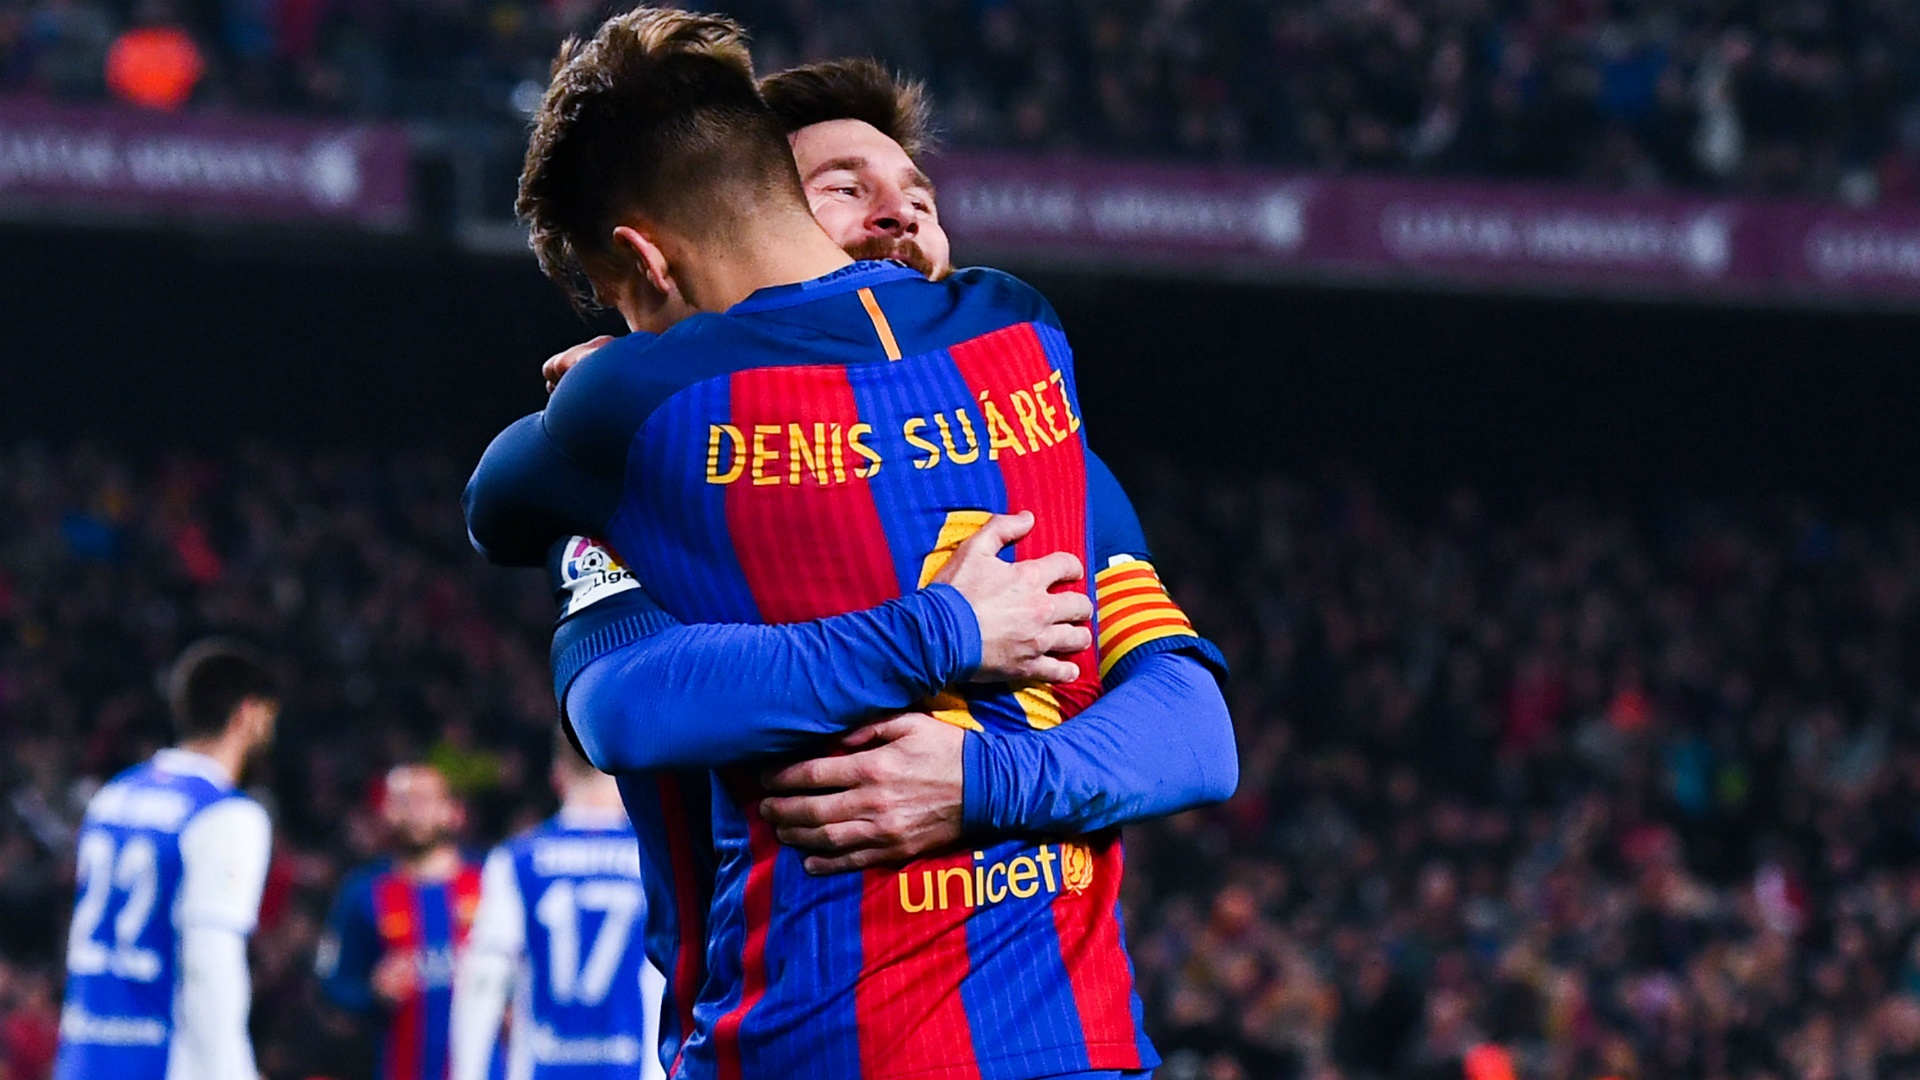 Denis Suarez: I have a special connection with Messi